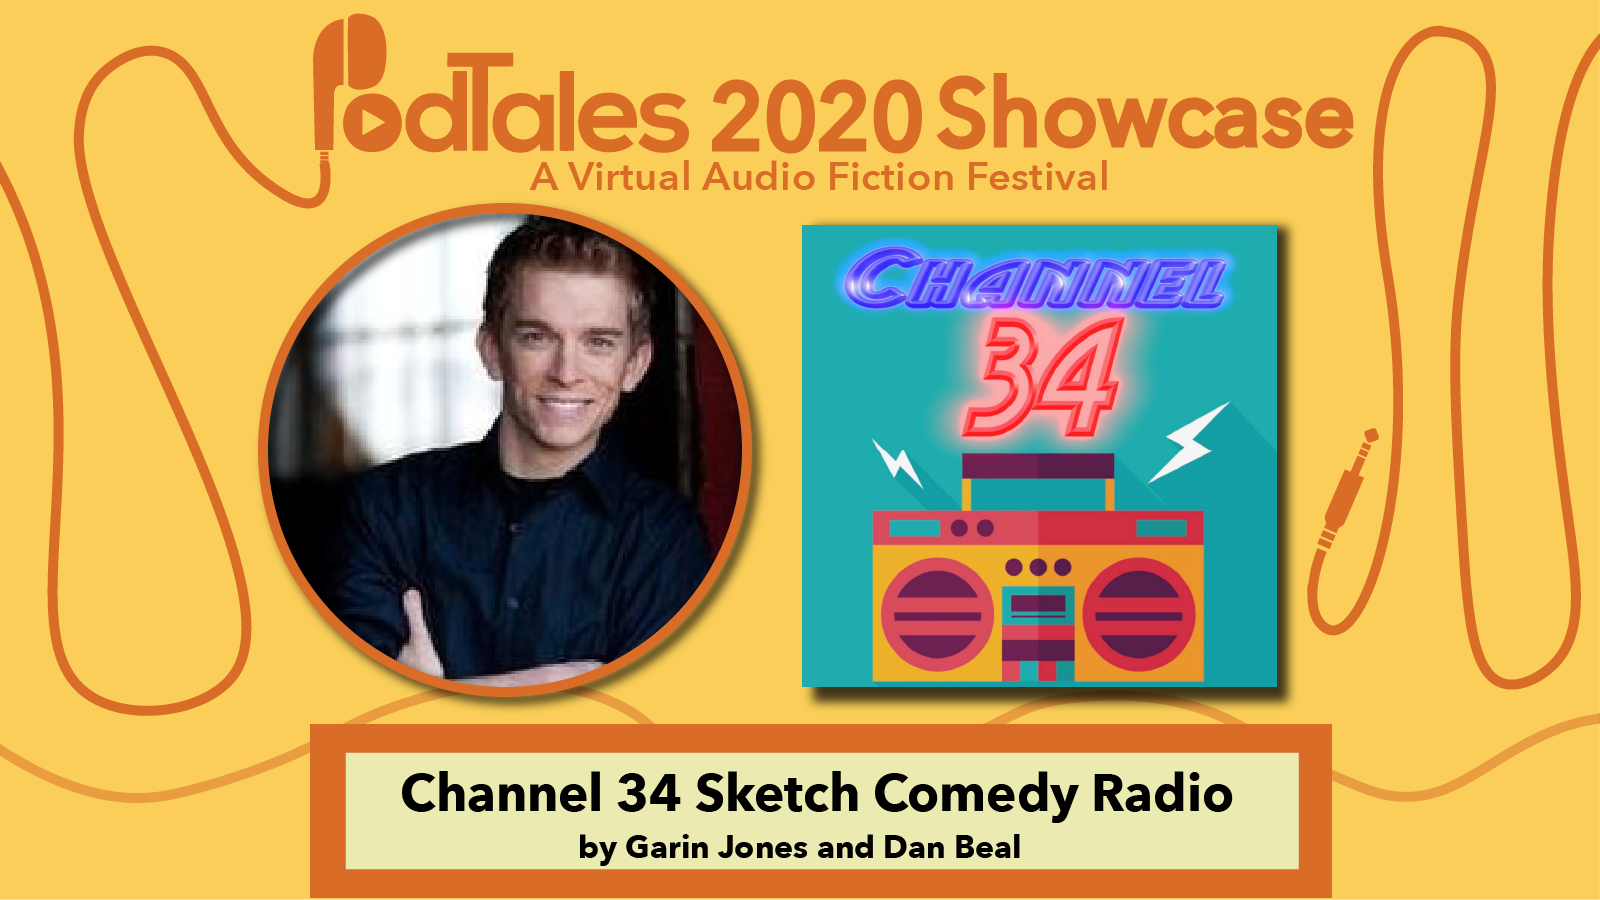 Text reading “PodTales 2020 Showcase: A Virtual Audio Fiction Festival”, Photo of Garin Jones, Show Art for Channel 34 Sketch Comedy Radio, Text reading “Channel 34 Sketch Comedy Radio by Garin Jones and Dan Beal”